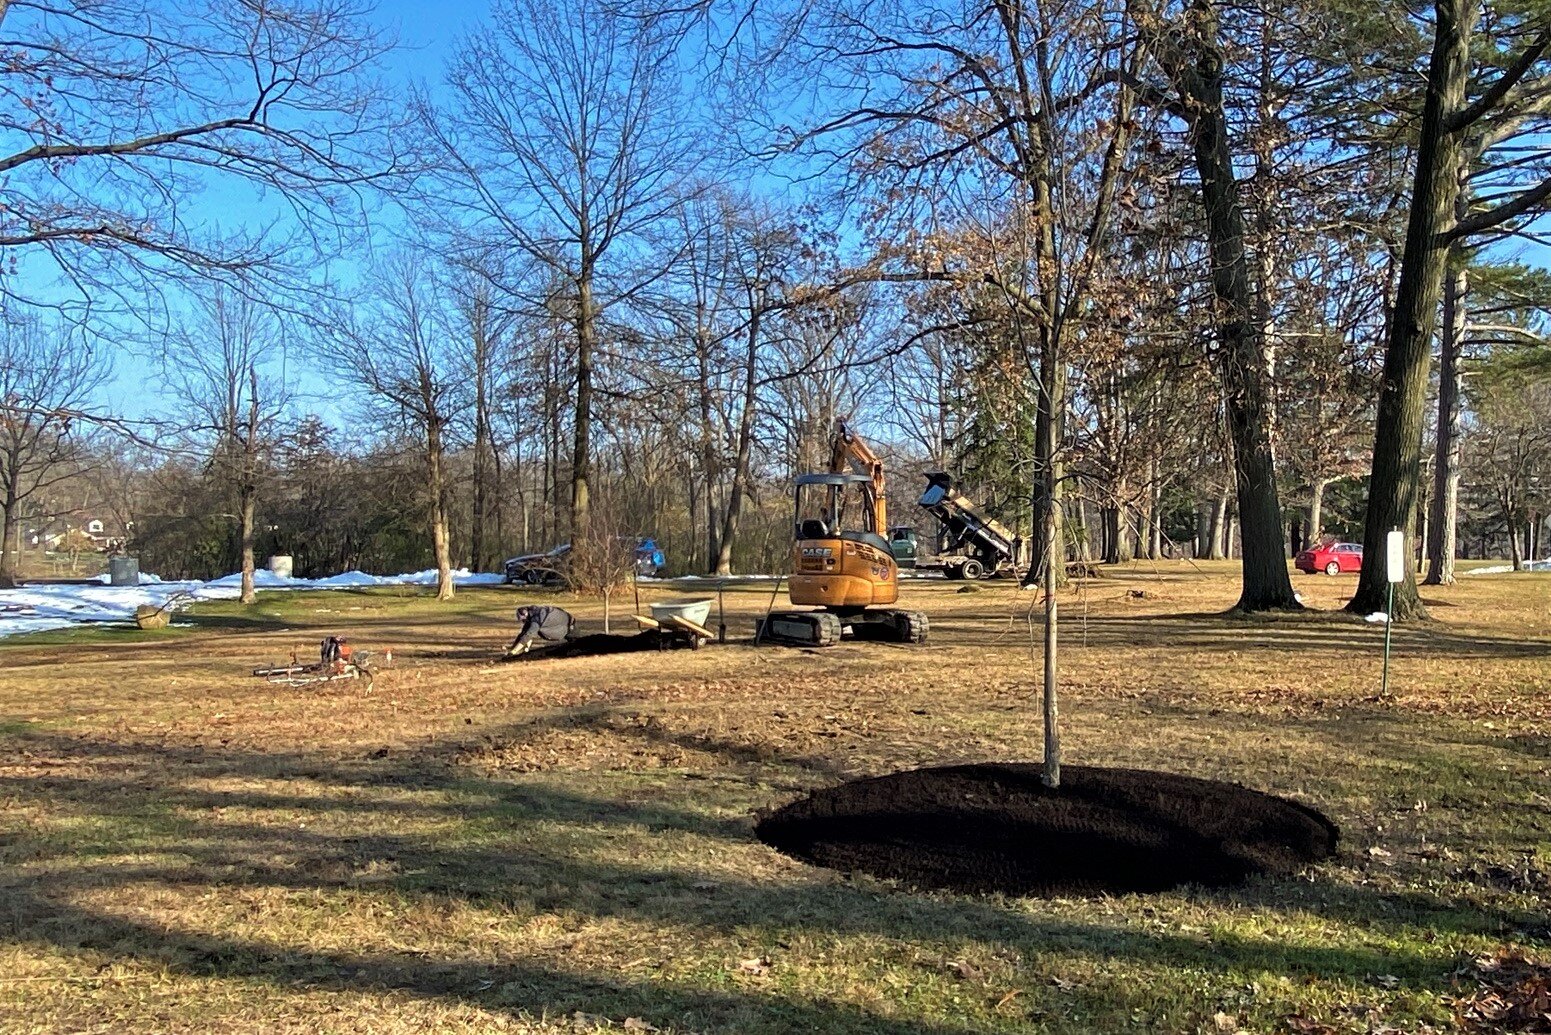  The Chinkapin Oak is planted, foreground, as the Ironwood is planted beyond. 